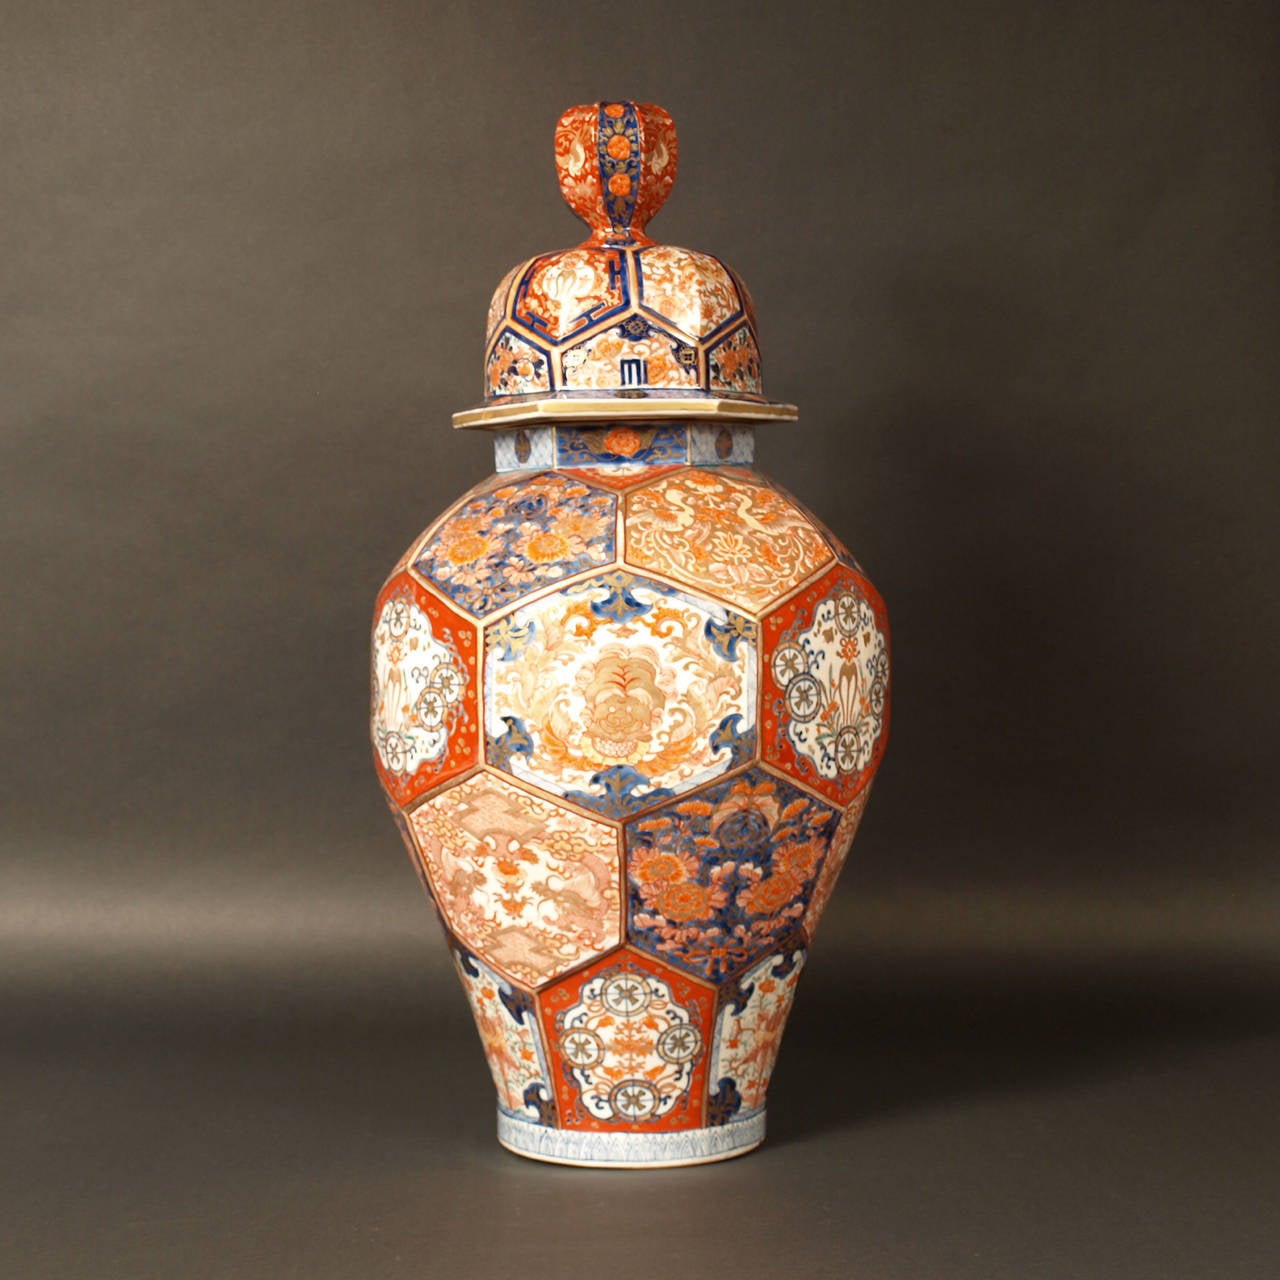 Highly decorative large covered vase. 
Arita porcelain hand-painted in the Imari pattern in cobalt blue, Iron red and gold.
68 cm high. Diameter is 35 cm.

Japan, mid-19th century.